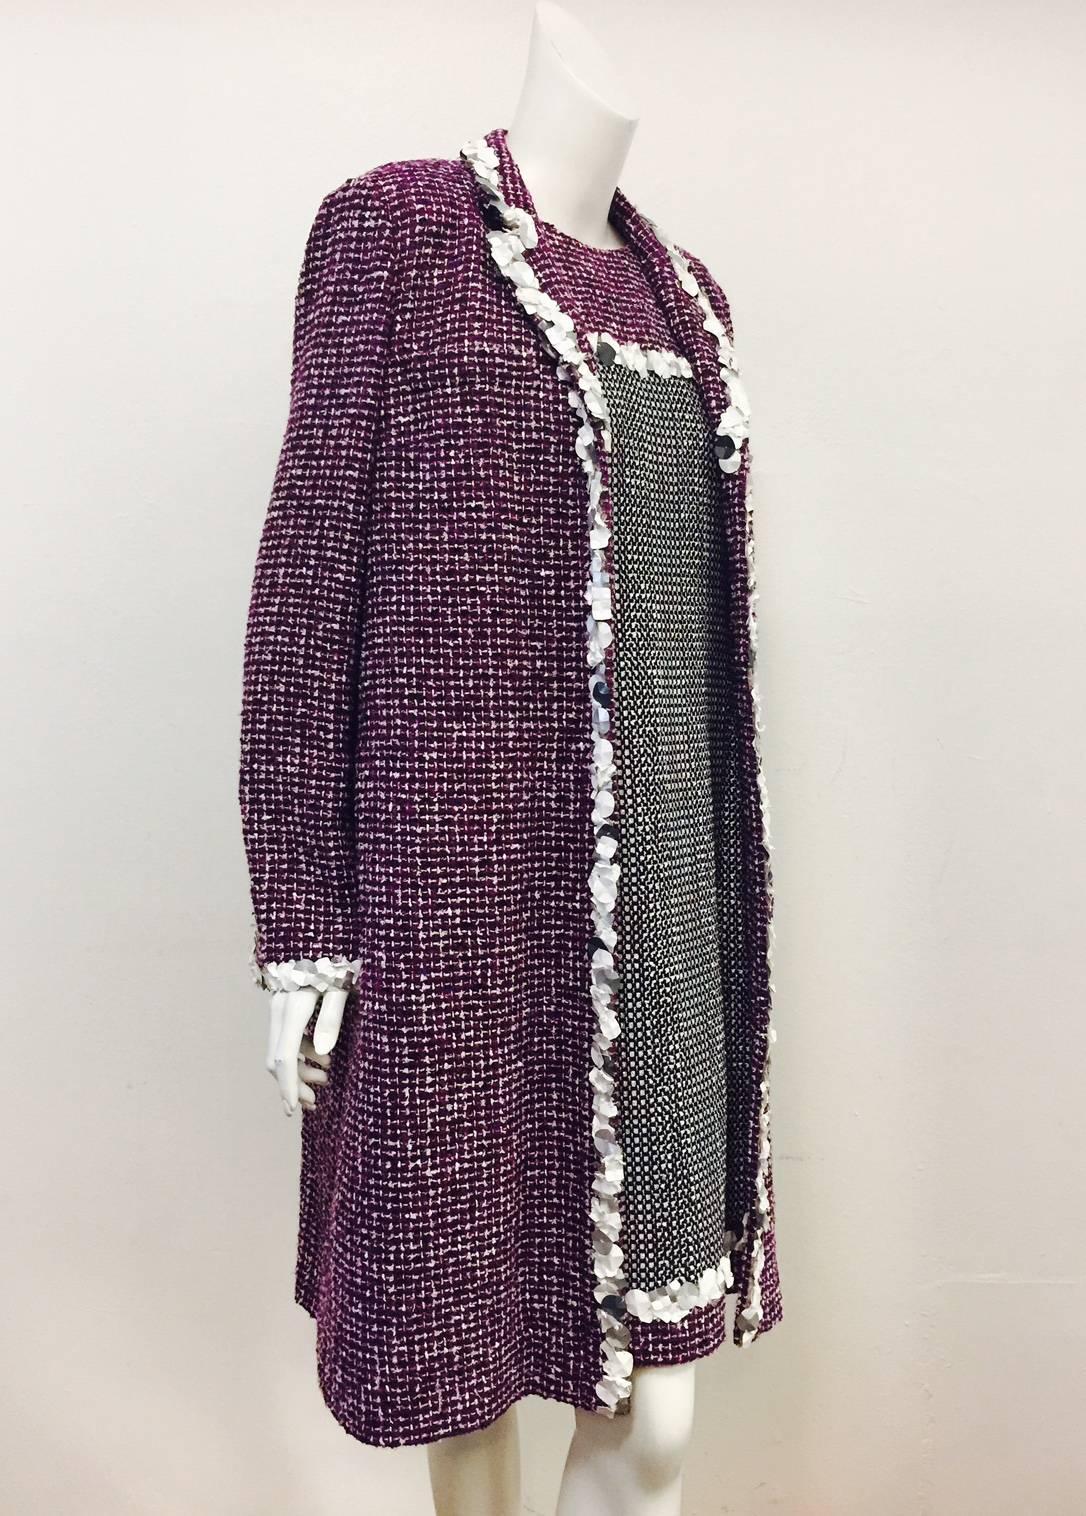 Chanel Multi Color Purple Tweed Sleeveless Dress was simply not enough!  It needed a long coat that perfectly complements the timeless style and sophistication of Chanel.  Influenced by the design aesthetic of the 1960's, this ensemble continues to